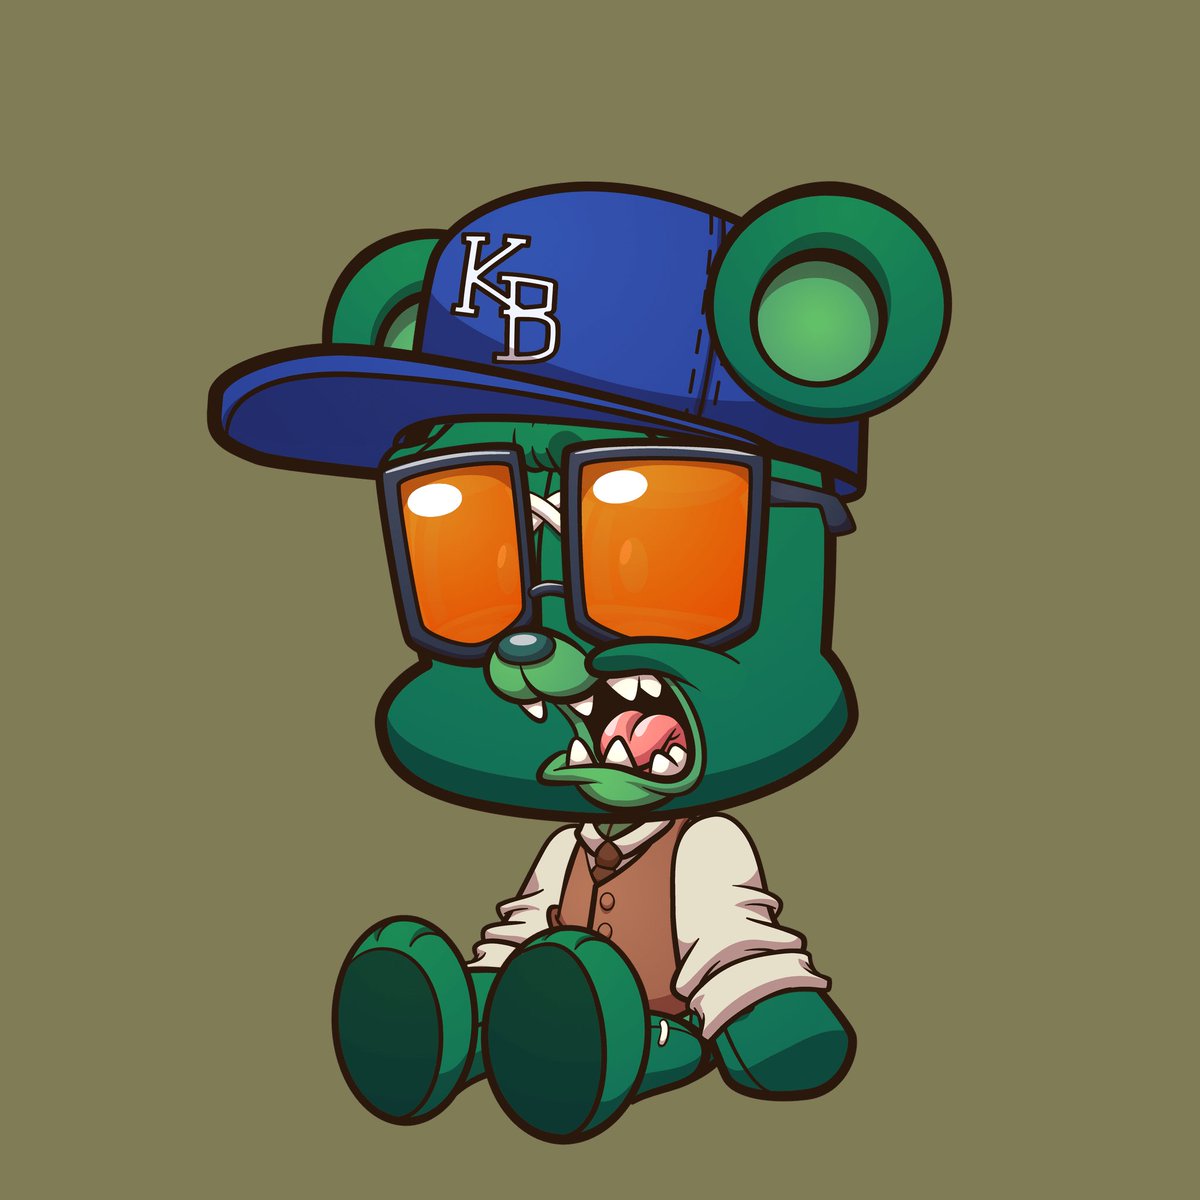 The Assistant Director, Cubby Director…will find a name. But had to make a SpielBear Cub! Hoping to see a director’s megaphone or chair or something to add to him! @killabearsnft #KillaCubs #KillaVerse @MemoAngeles_KB